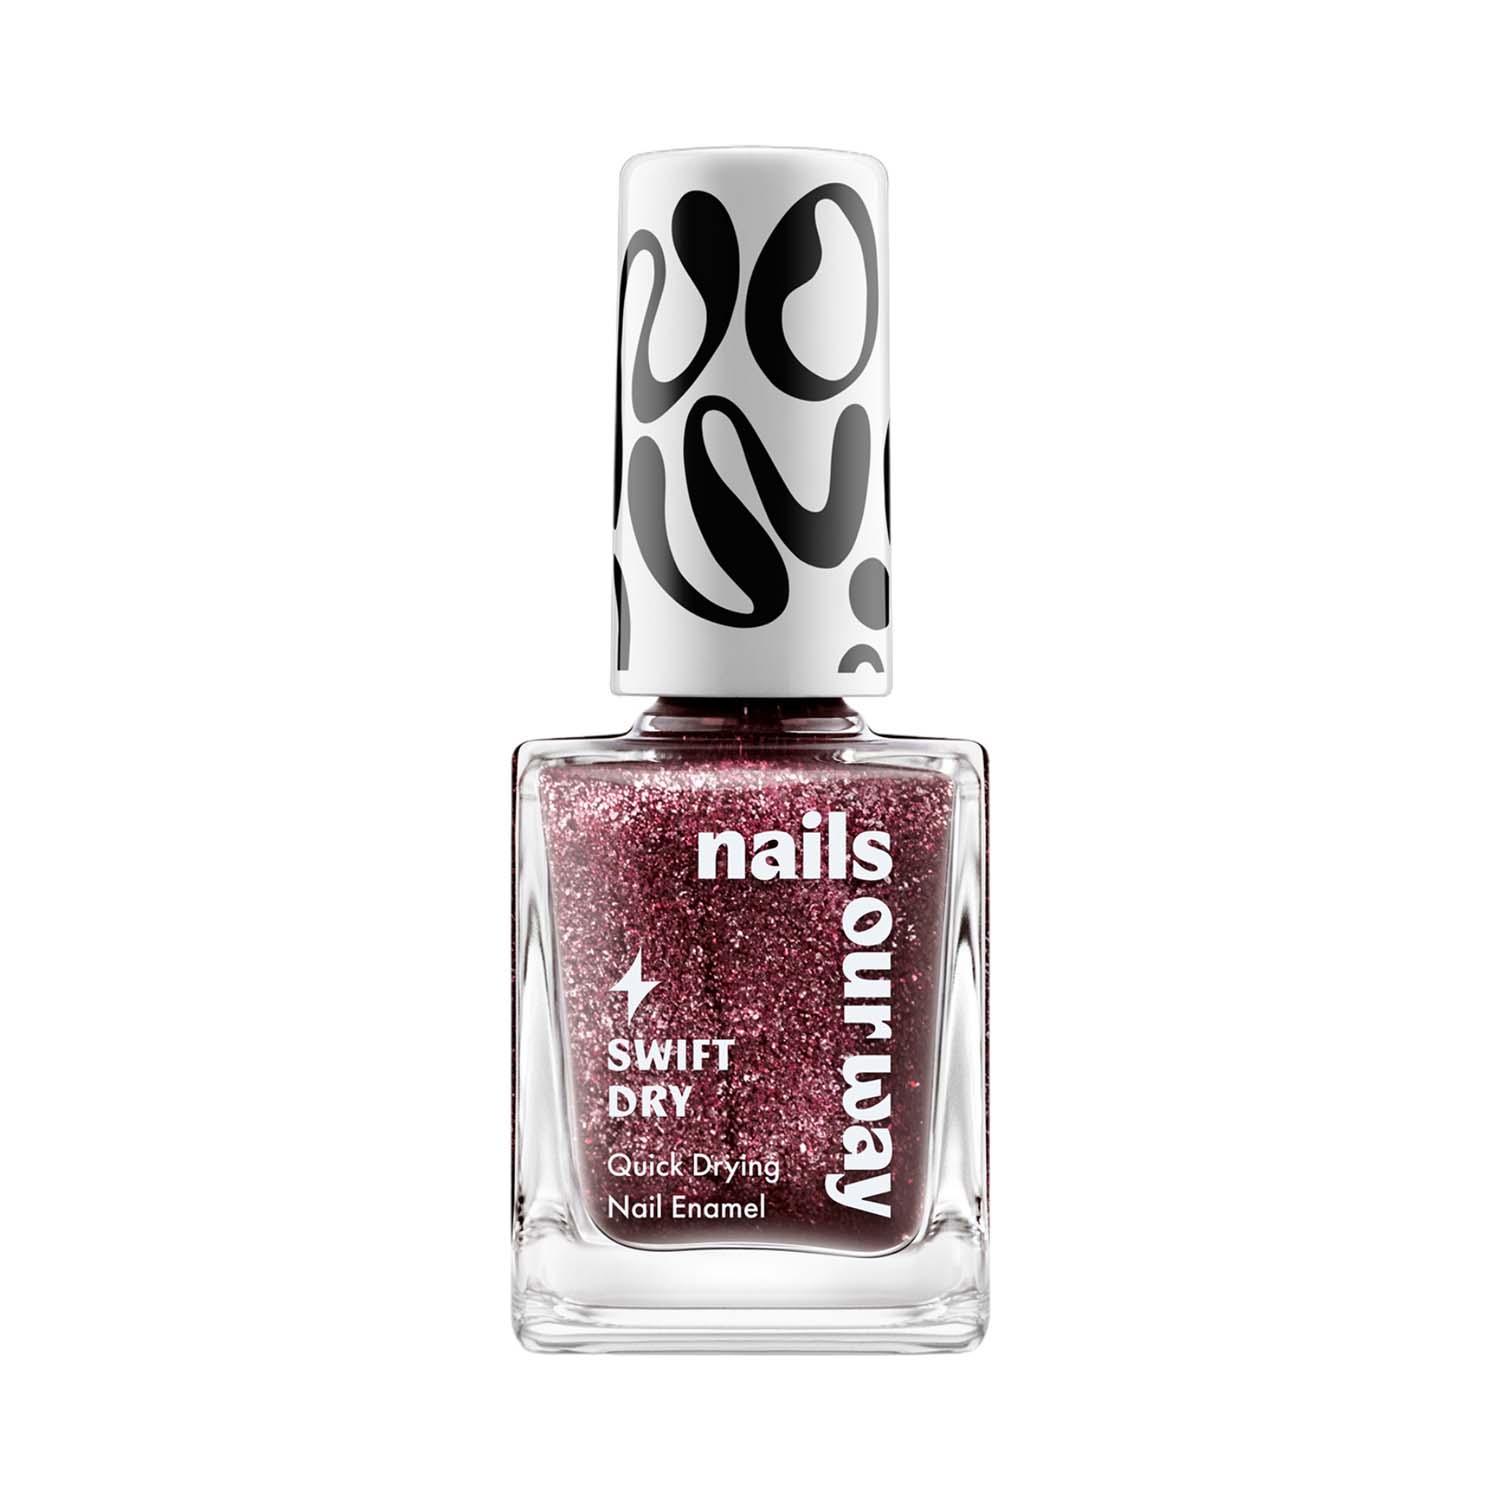 Nails Our Way Swift Dry Nail Enamel - Copper Couture (10 ml)